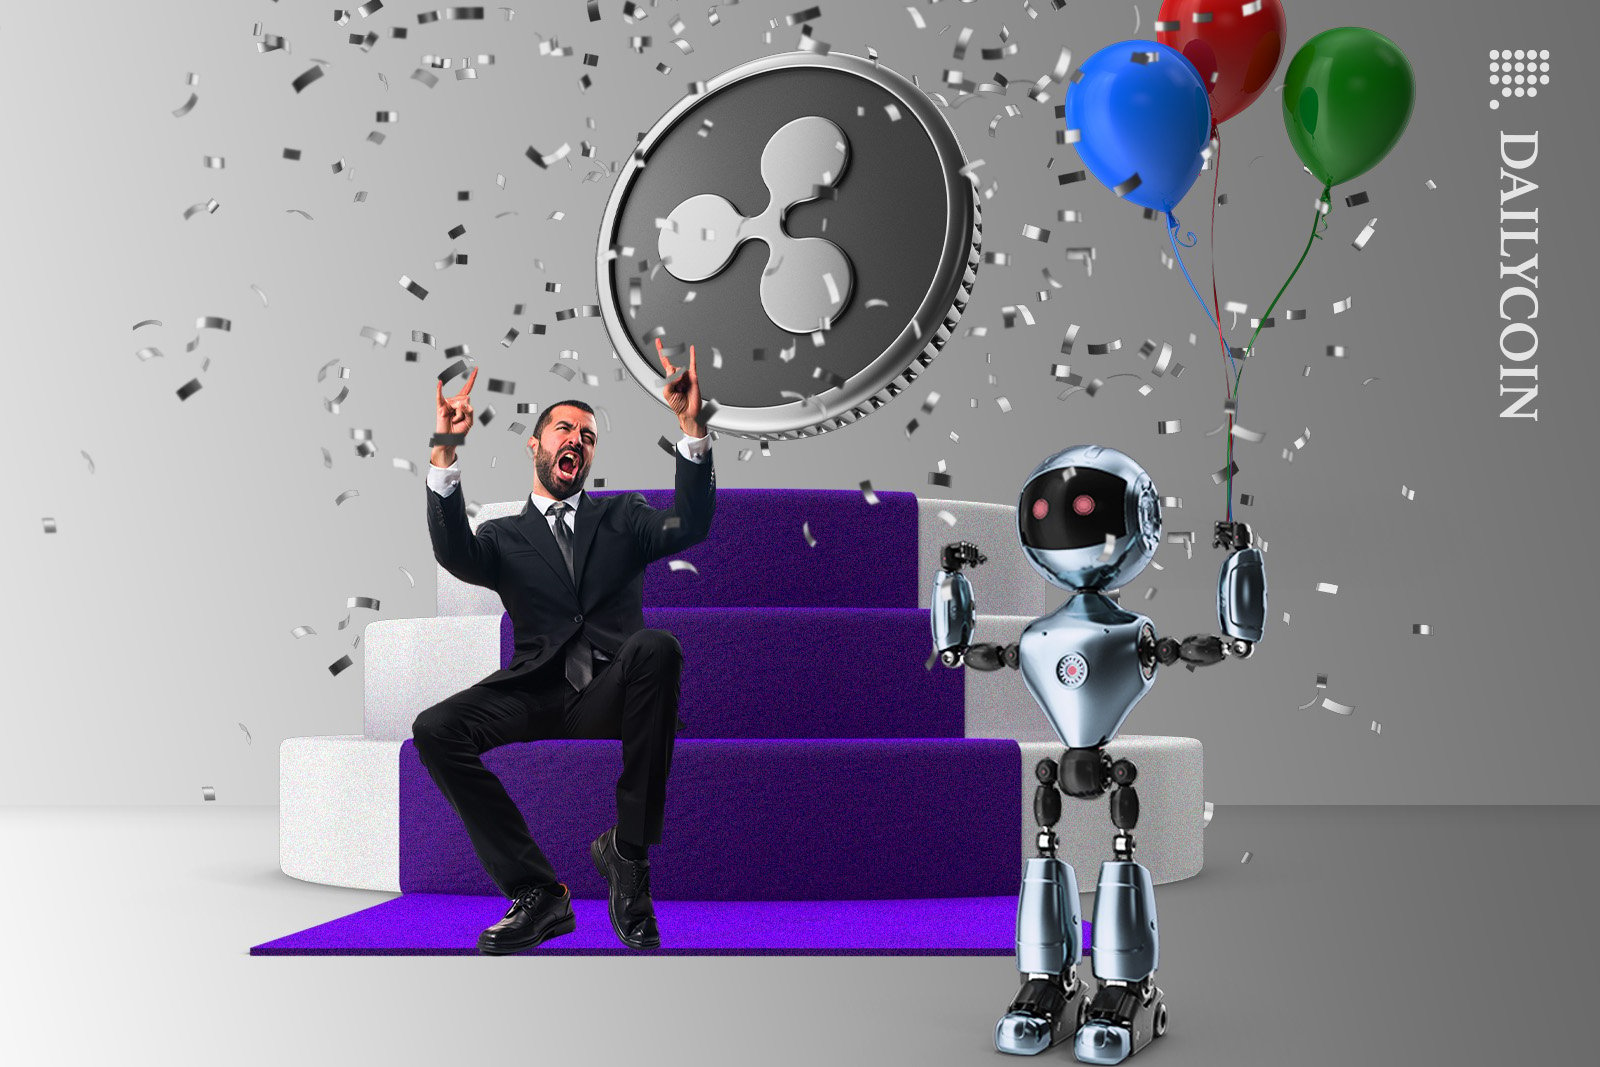 Guy and robot celebrating Ripple coin.